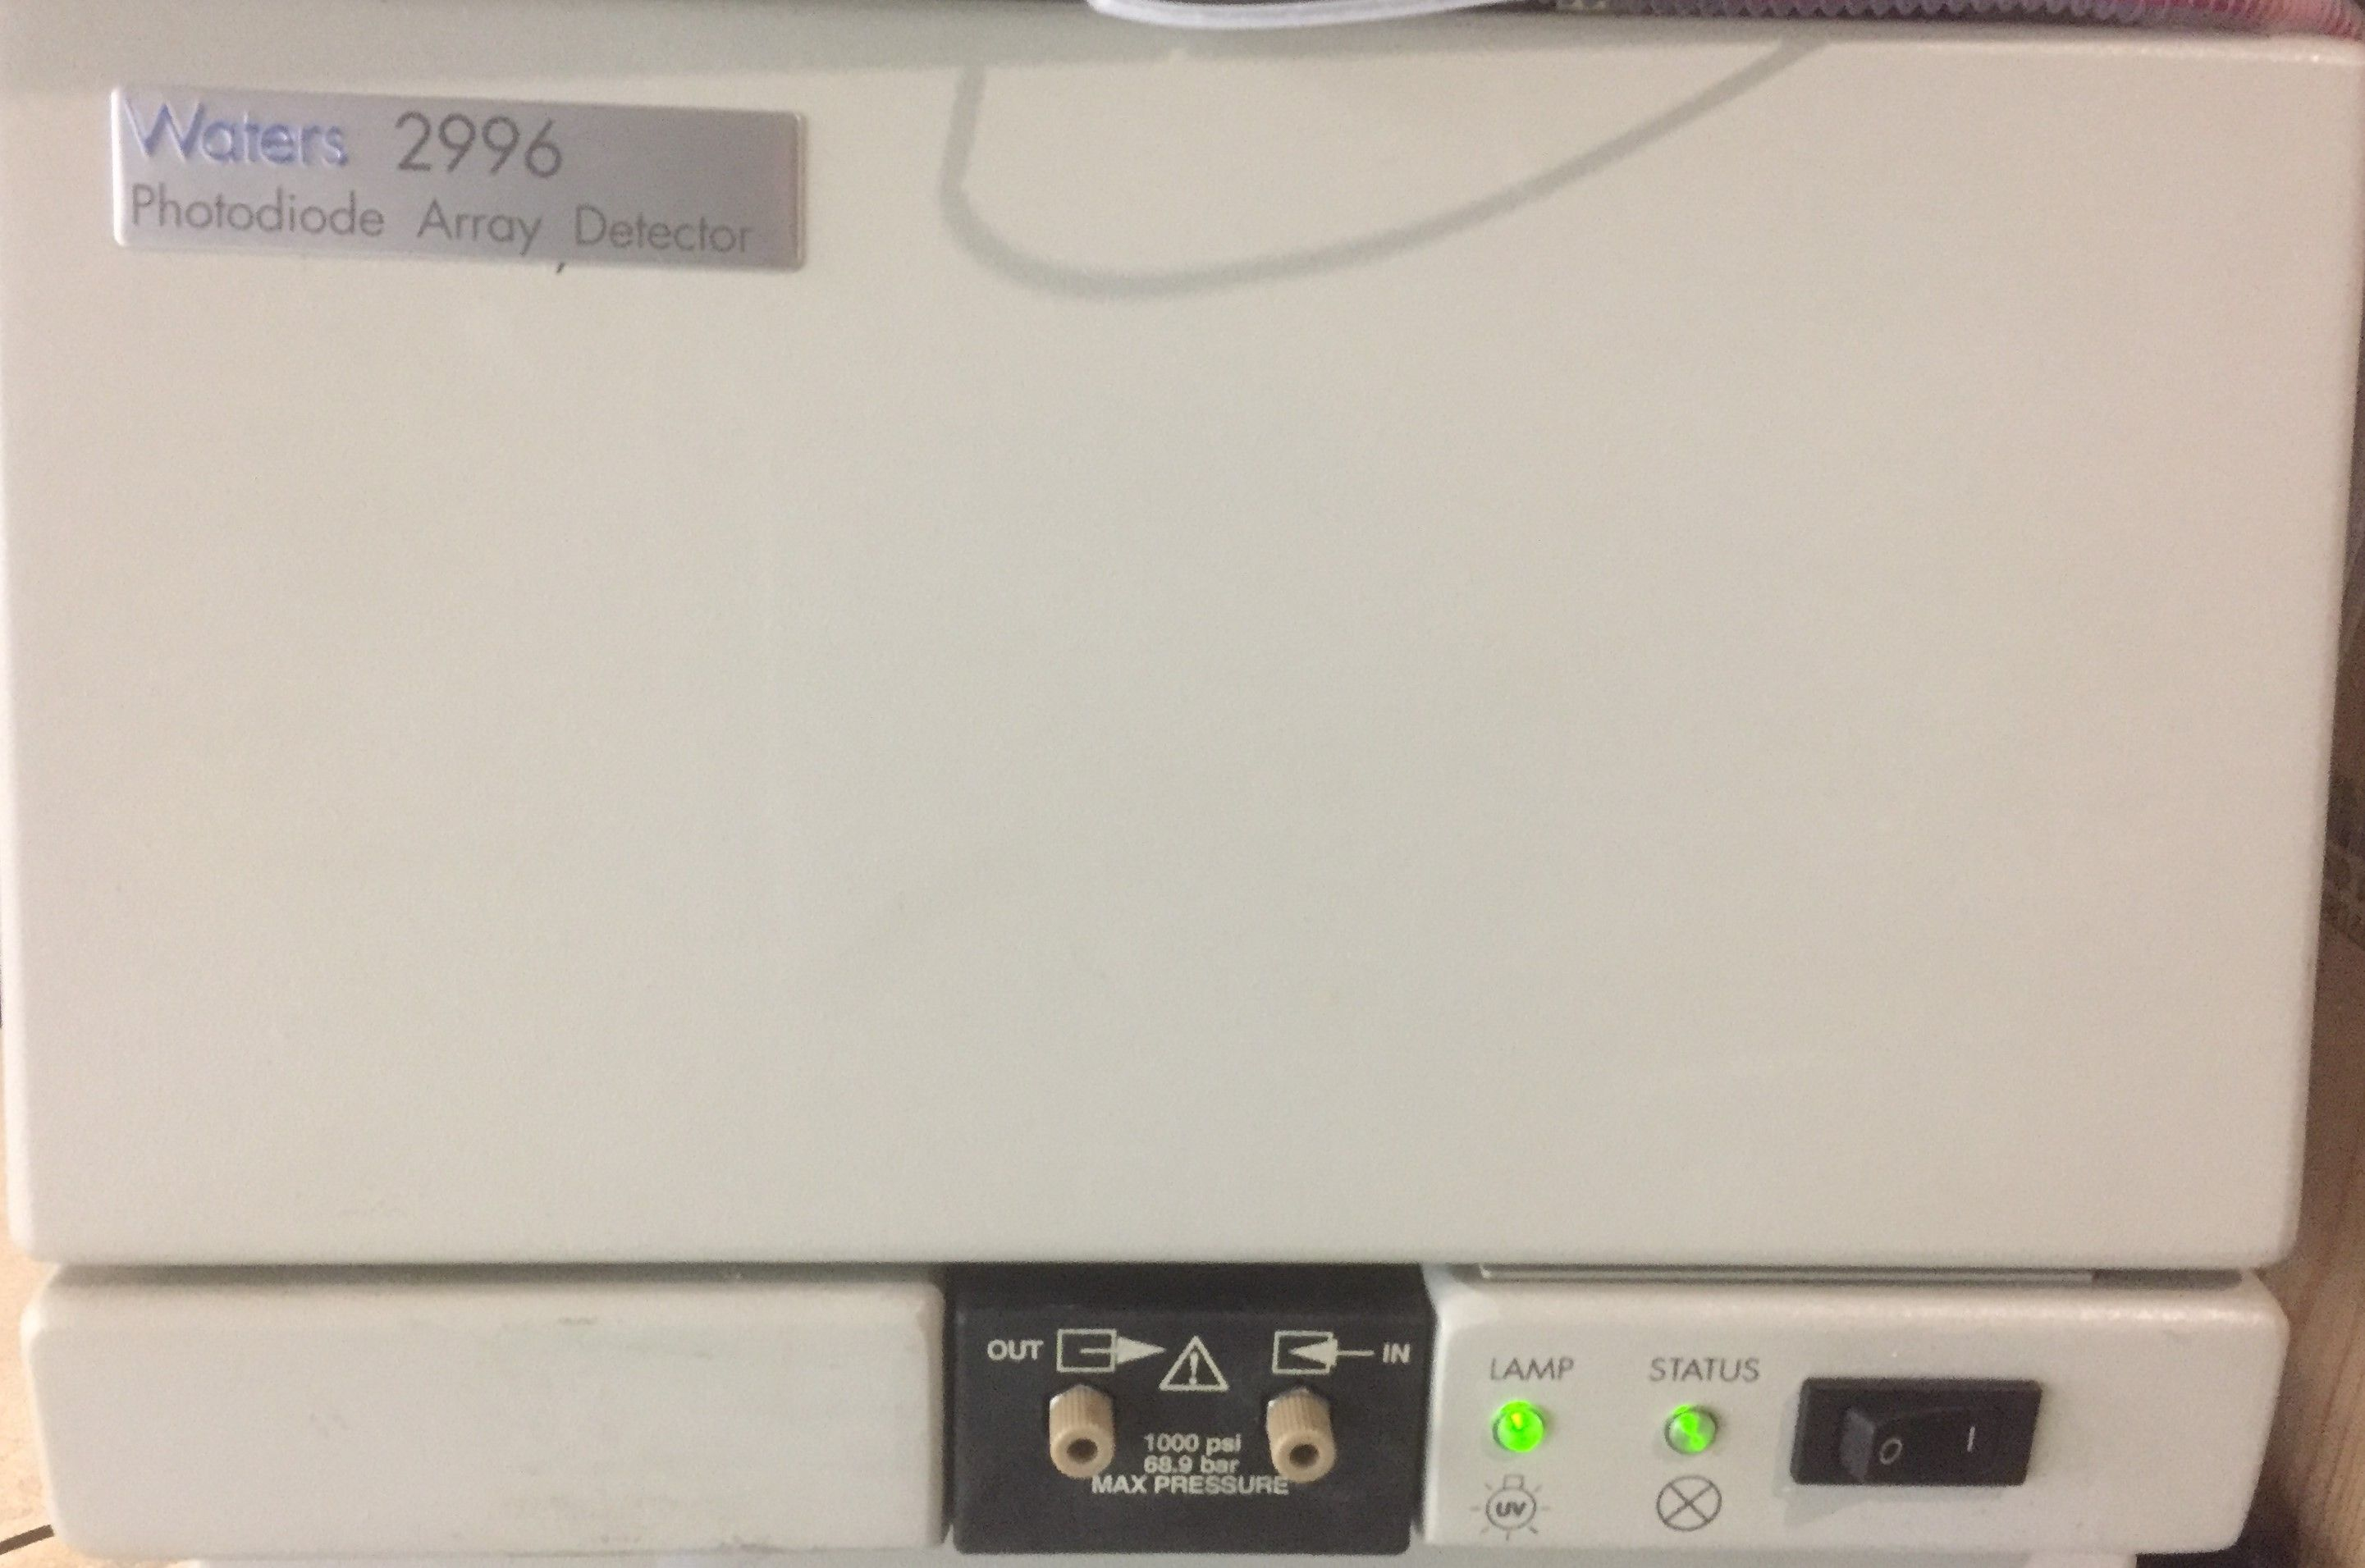 Waters 2996 PDA detector, tested in good condition